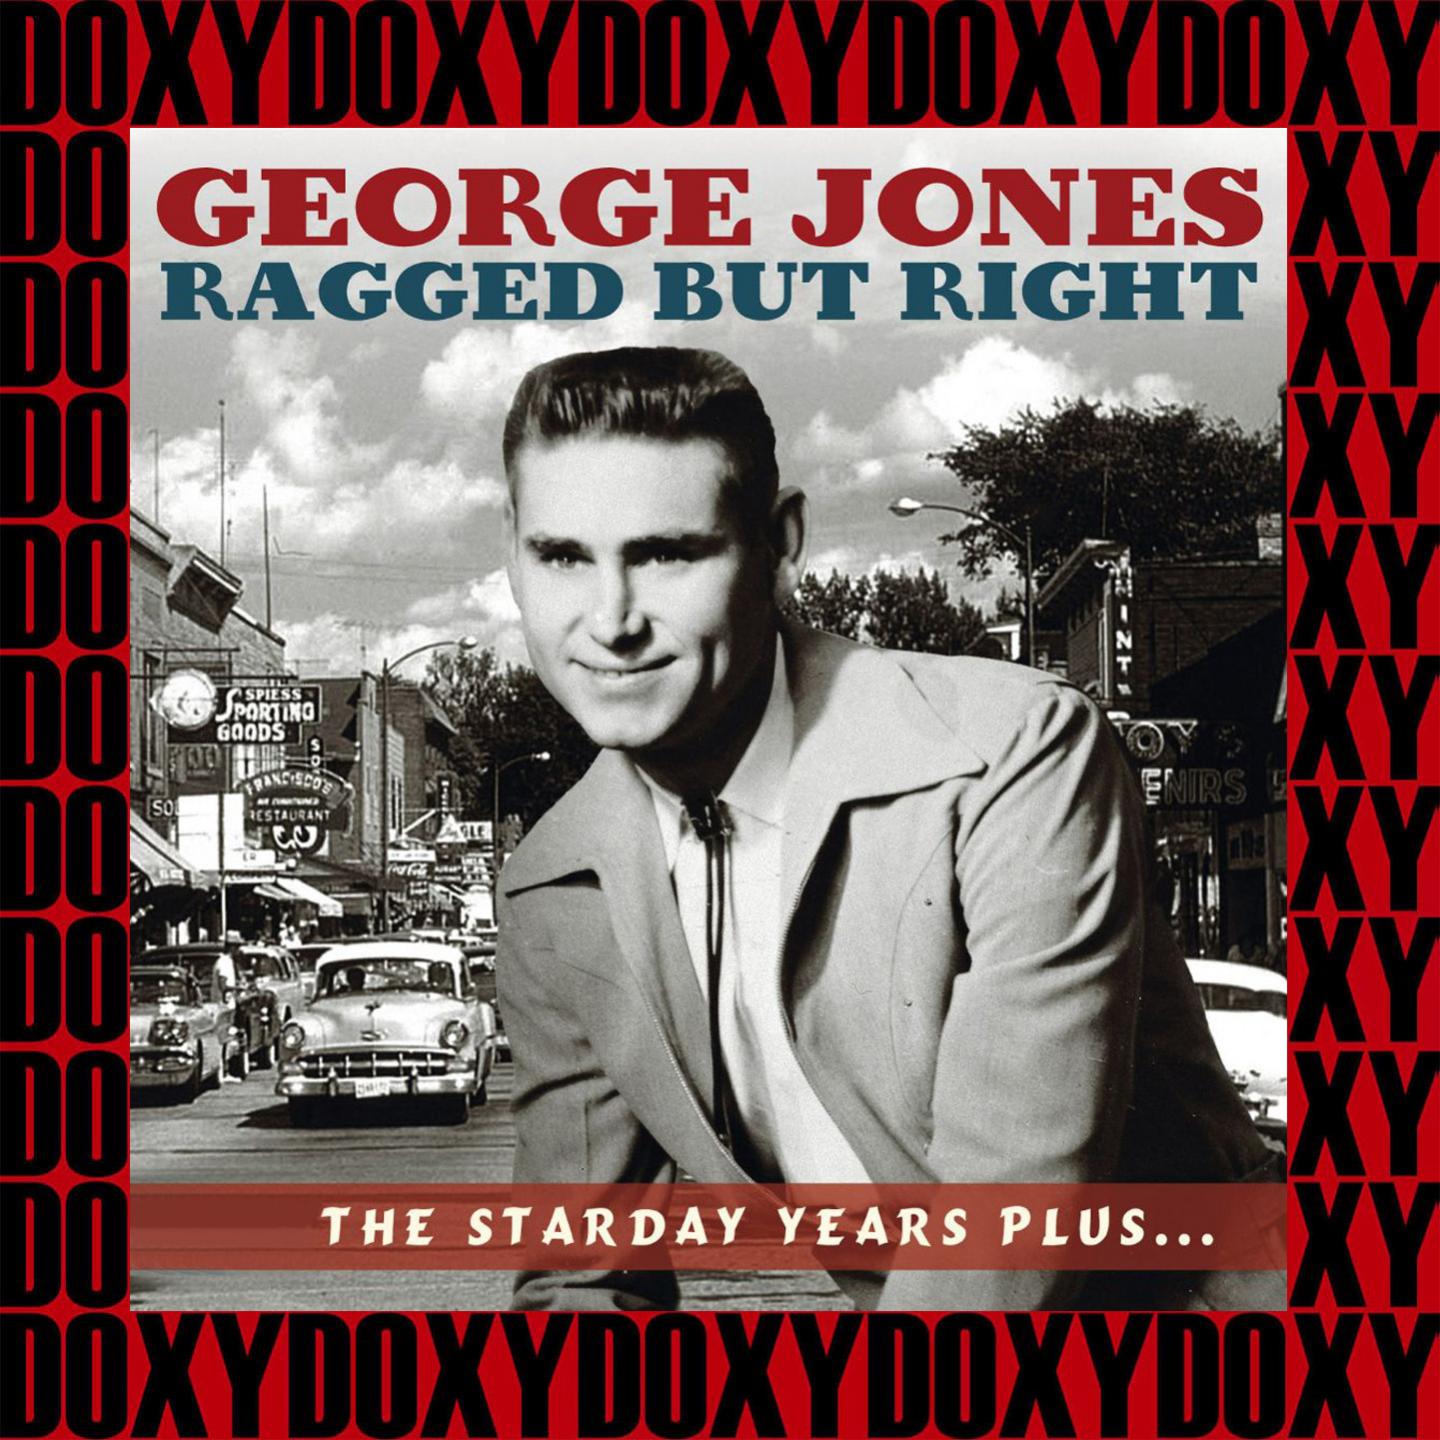 Ragged But Right: The Starday Years Plus..., Vol.1 (Remastered Version) (Doxy Collection)